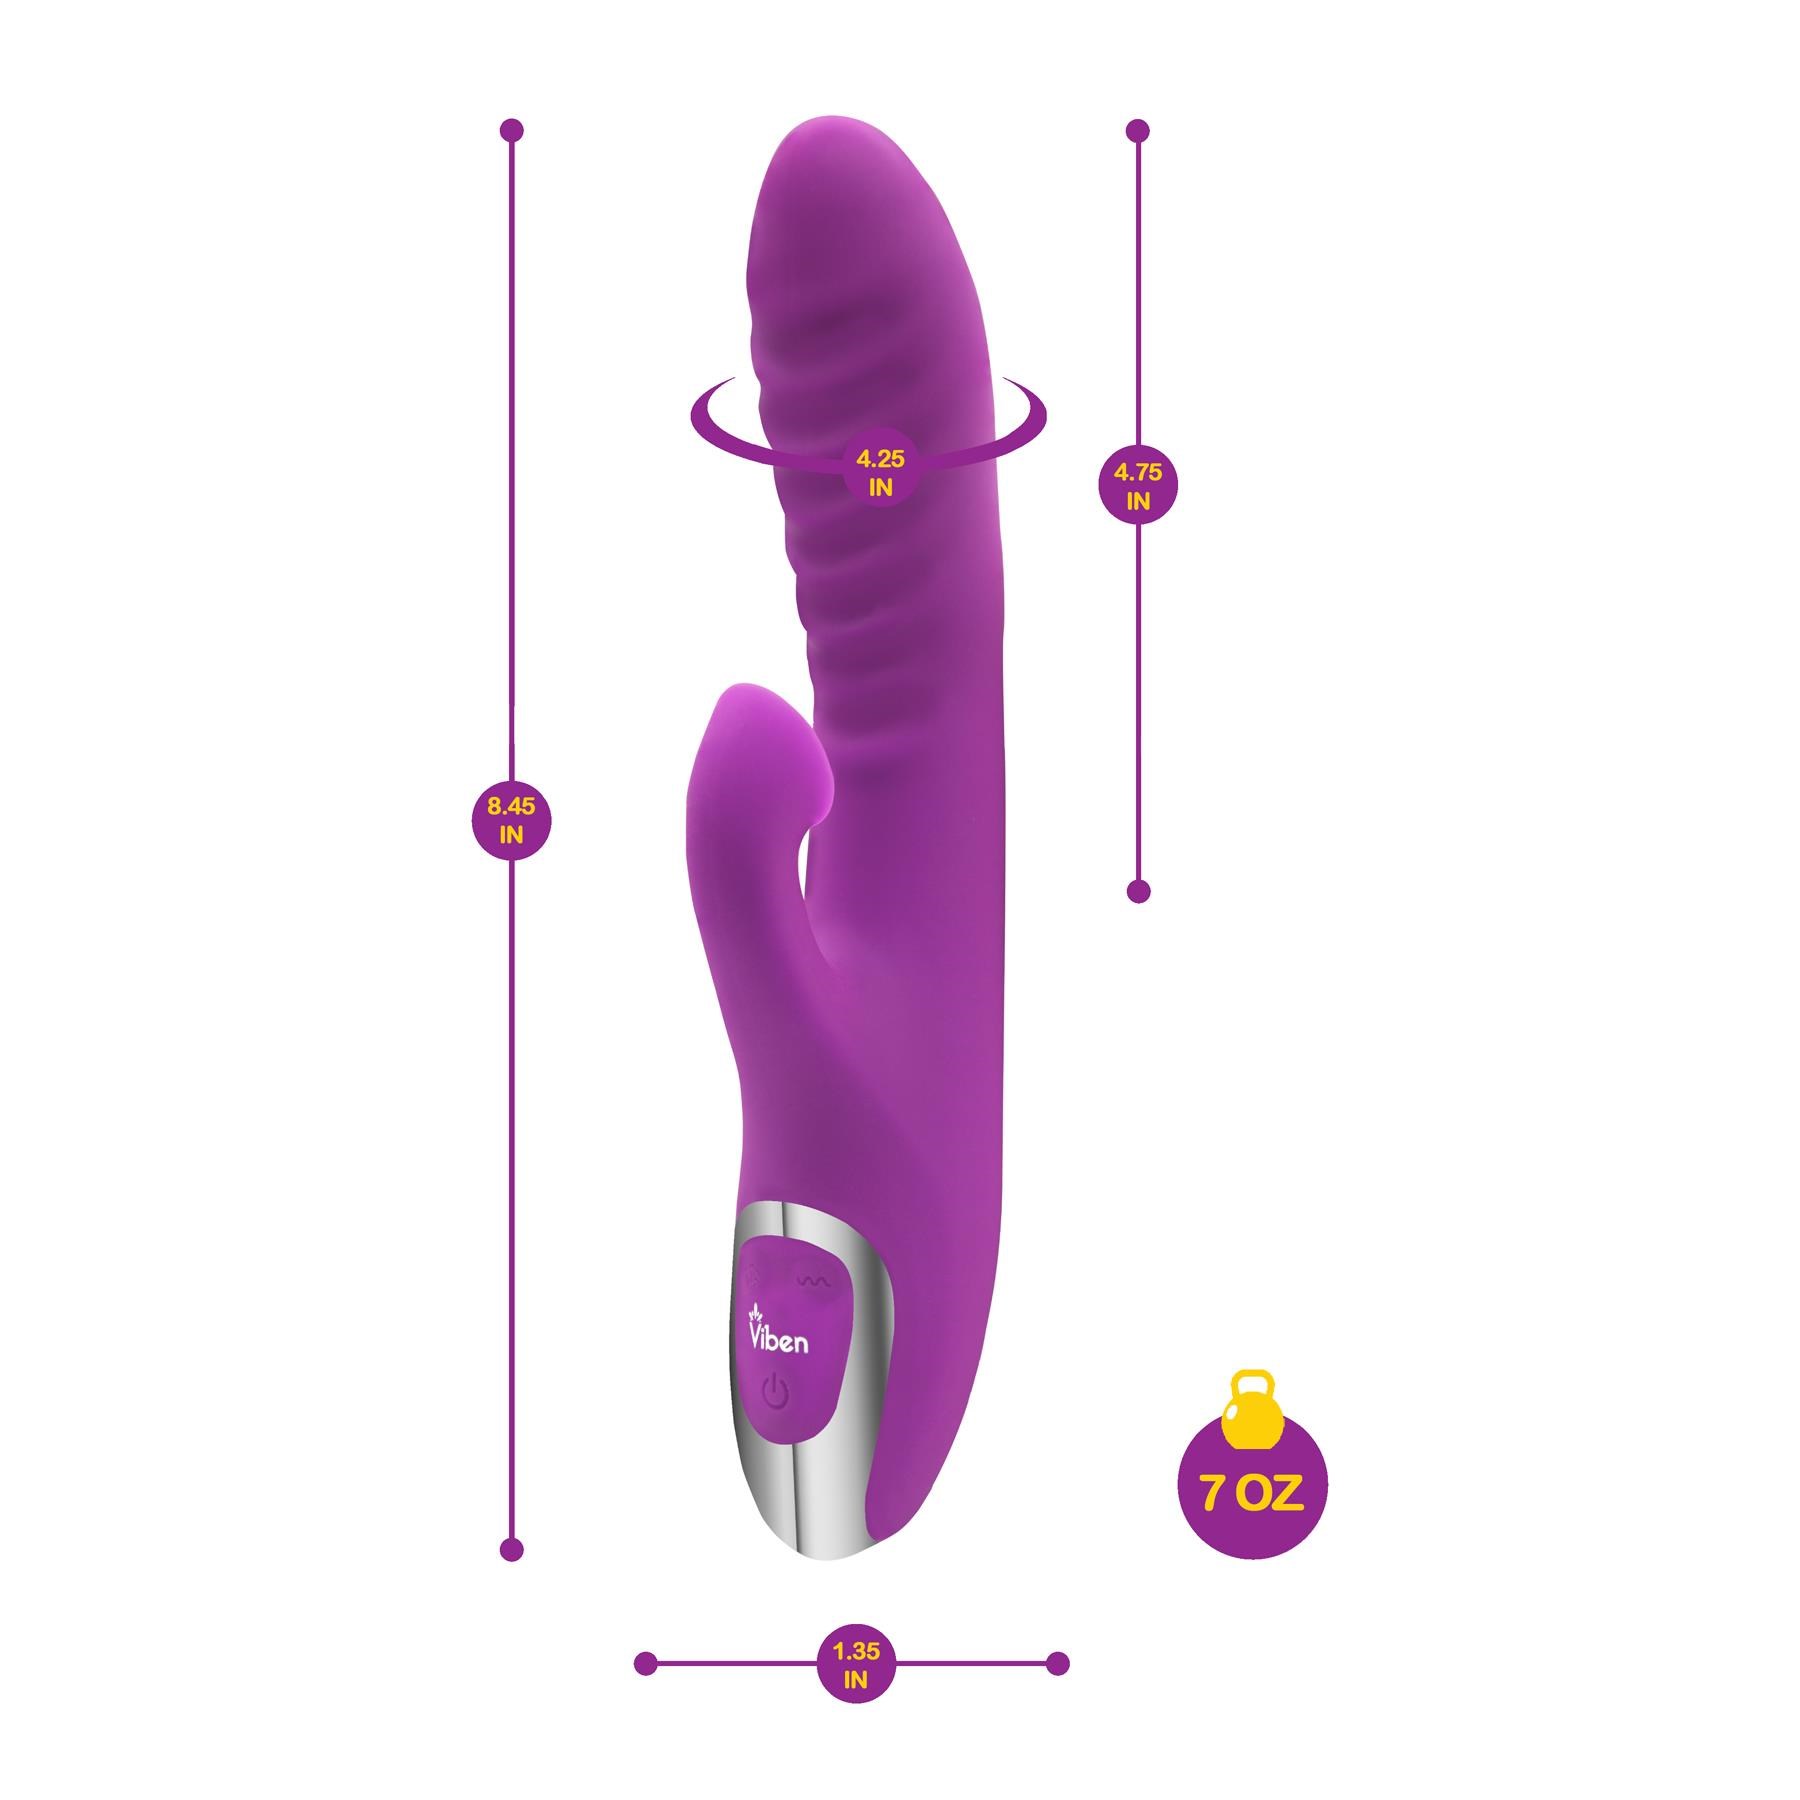 Frenzy Rechargeable Suction Rabbit - Dimensions